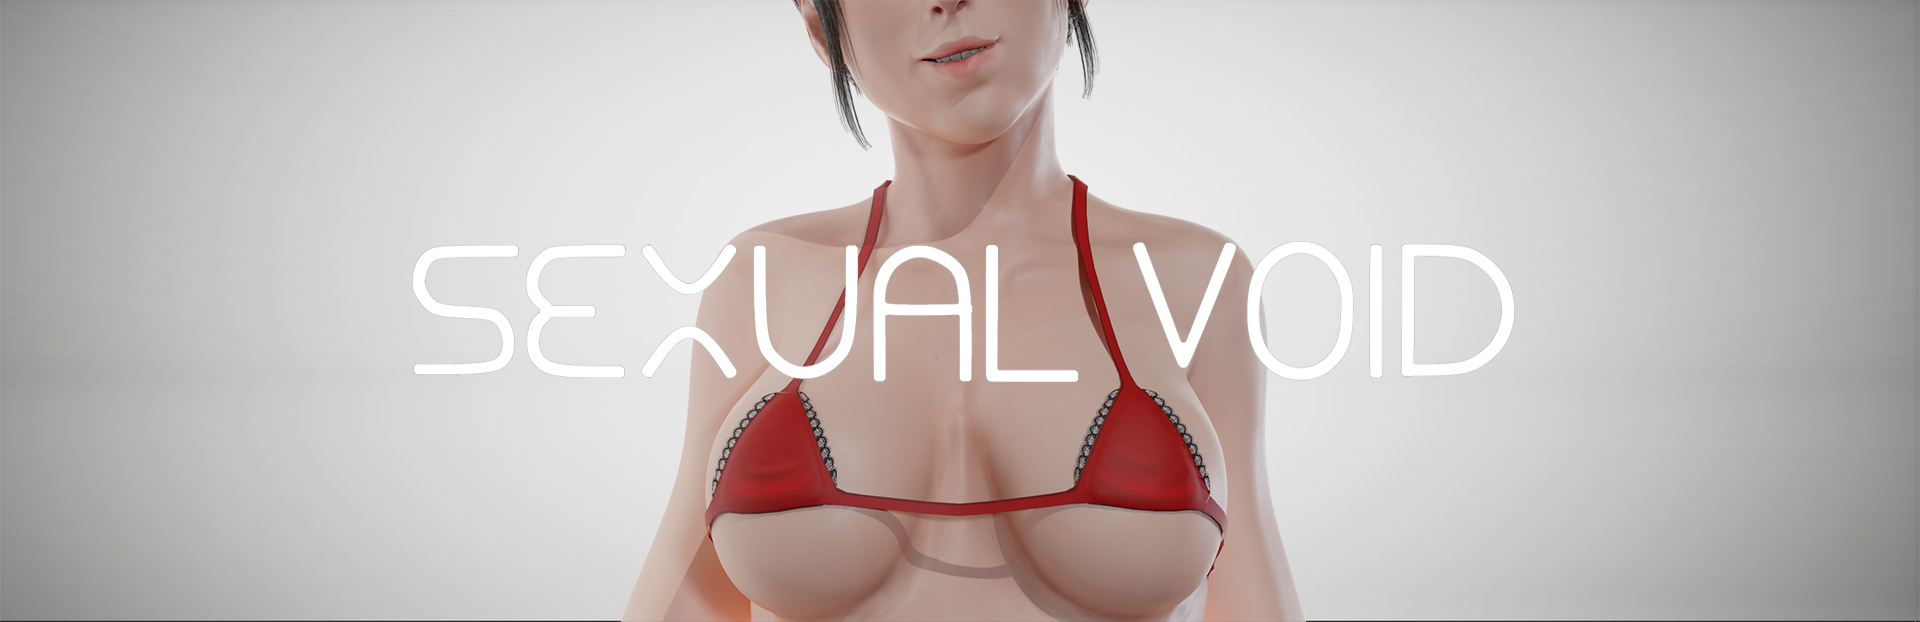 Sex V0id S - Sexual Void [COMPLETED] - free game download, reviews, mega - xGames